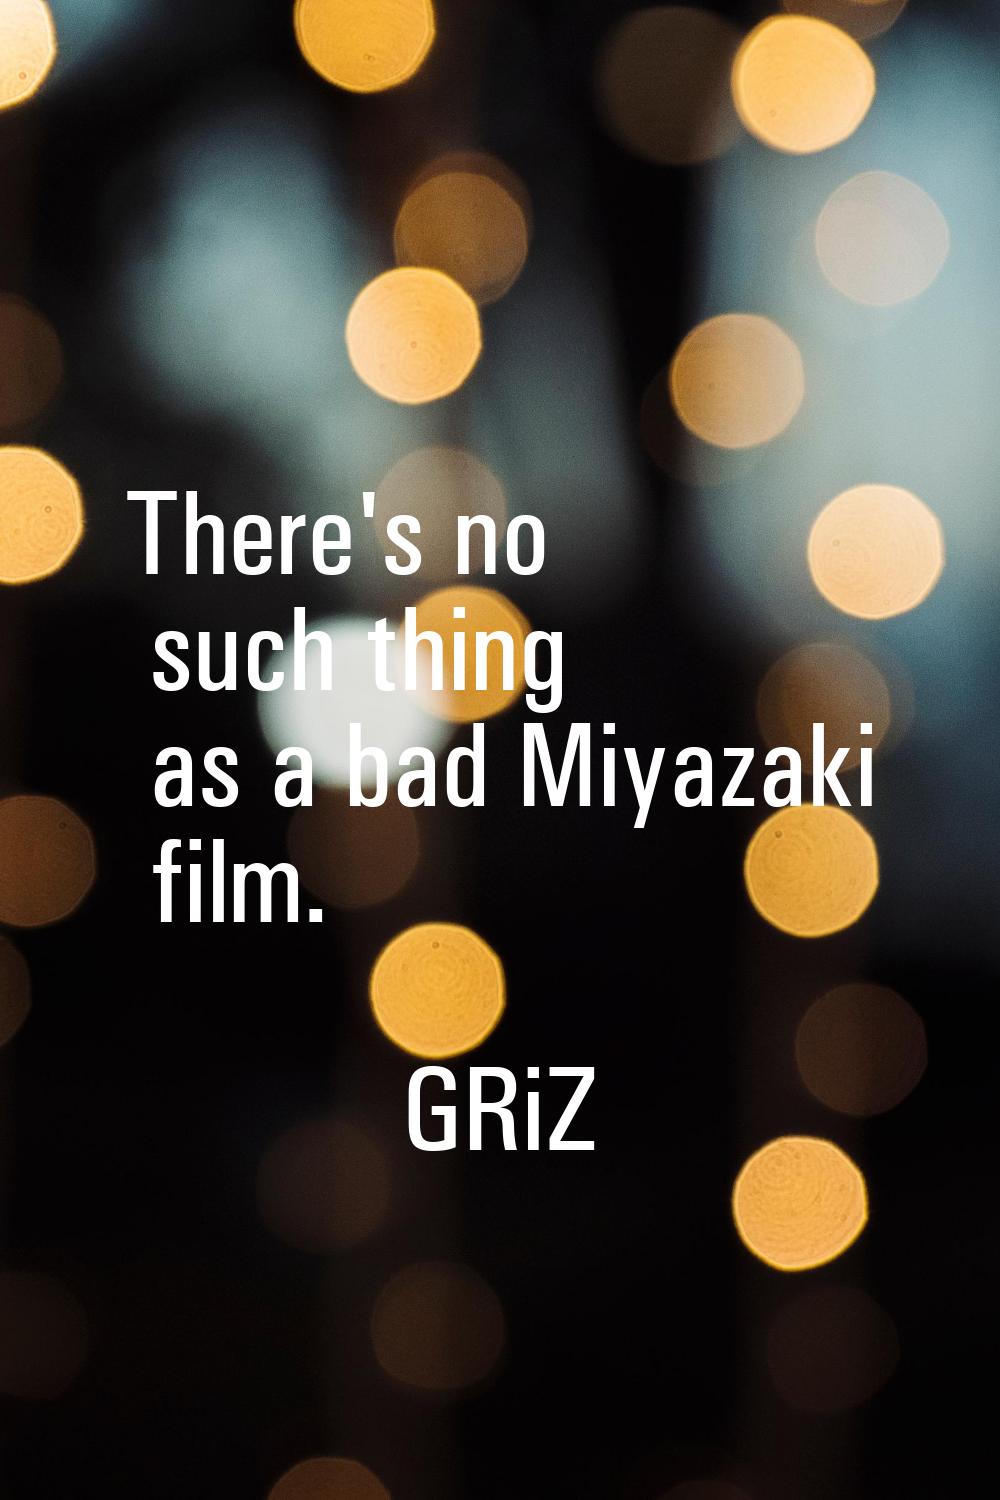 There's no such thing as a bad Miyazaki film.